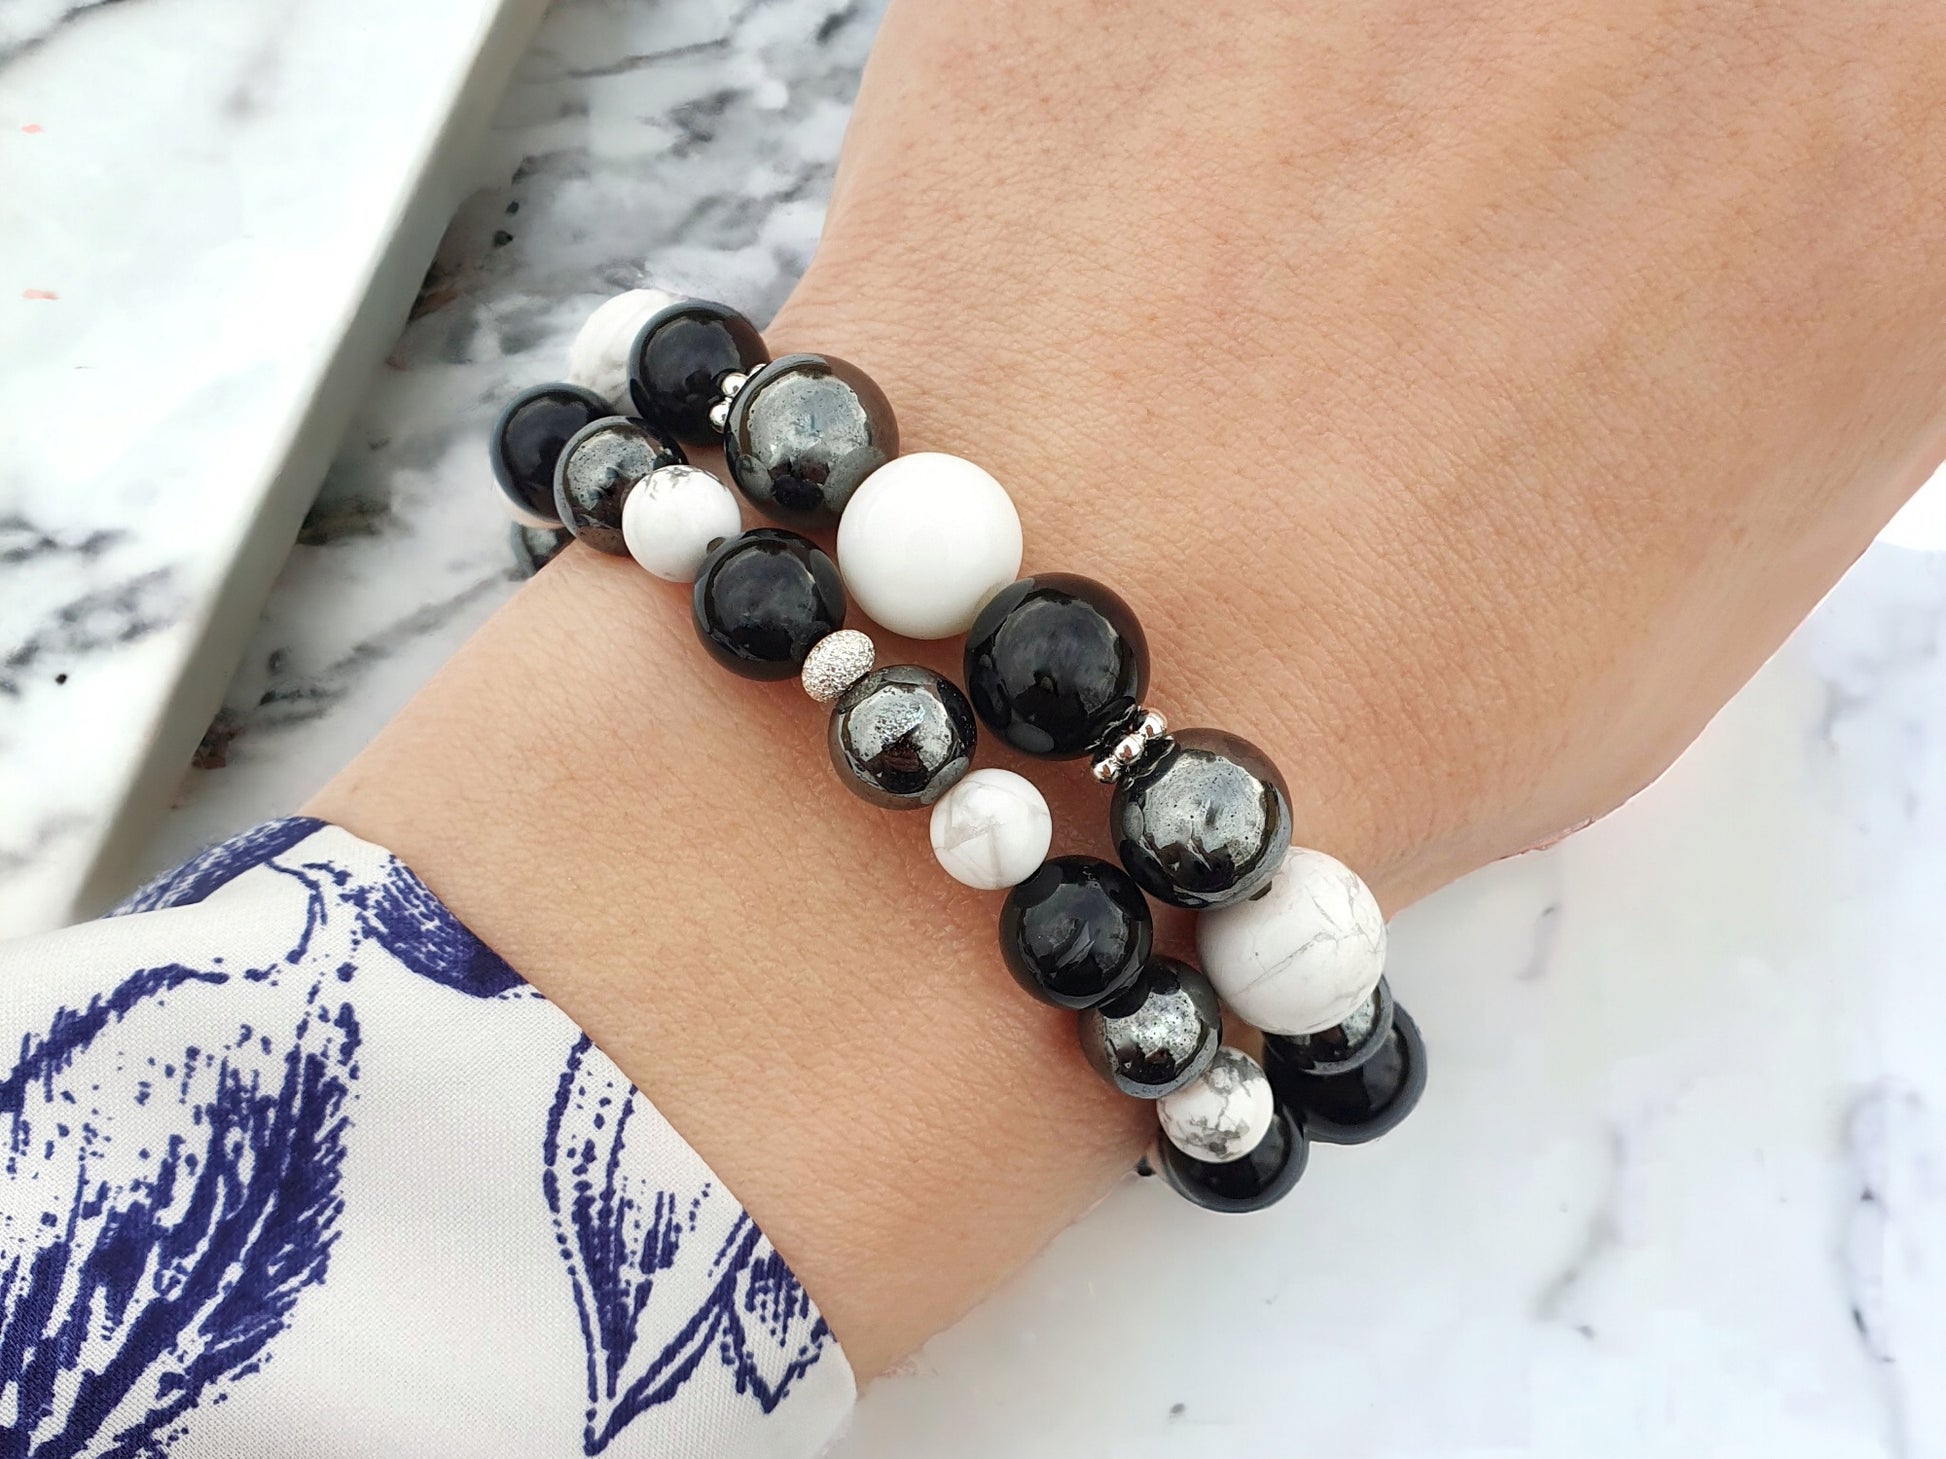 Handcrafted bracelet made from hematite, onyx, howlite